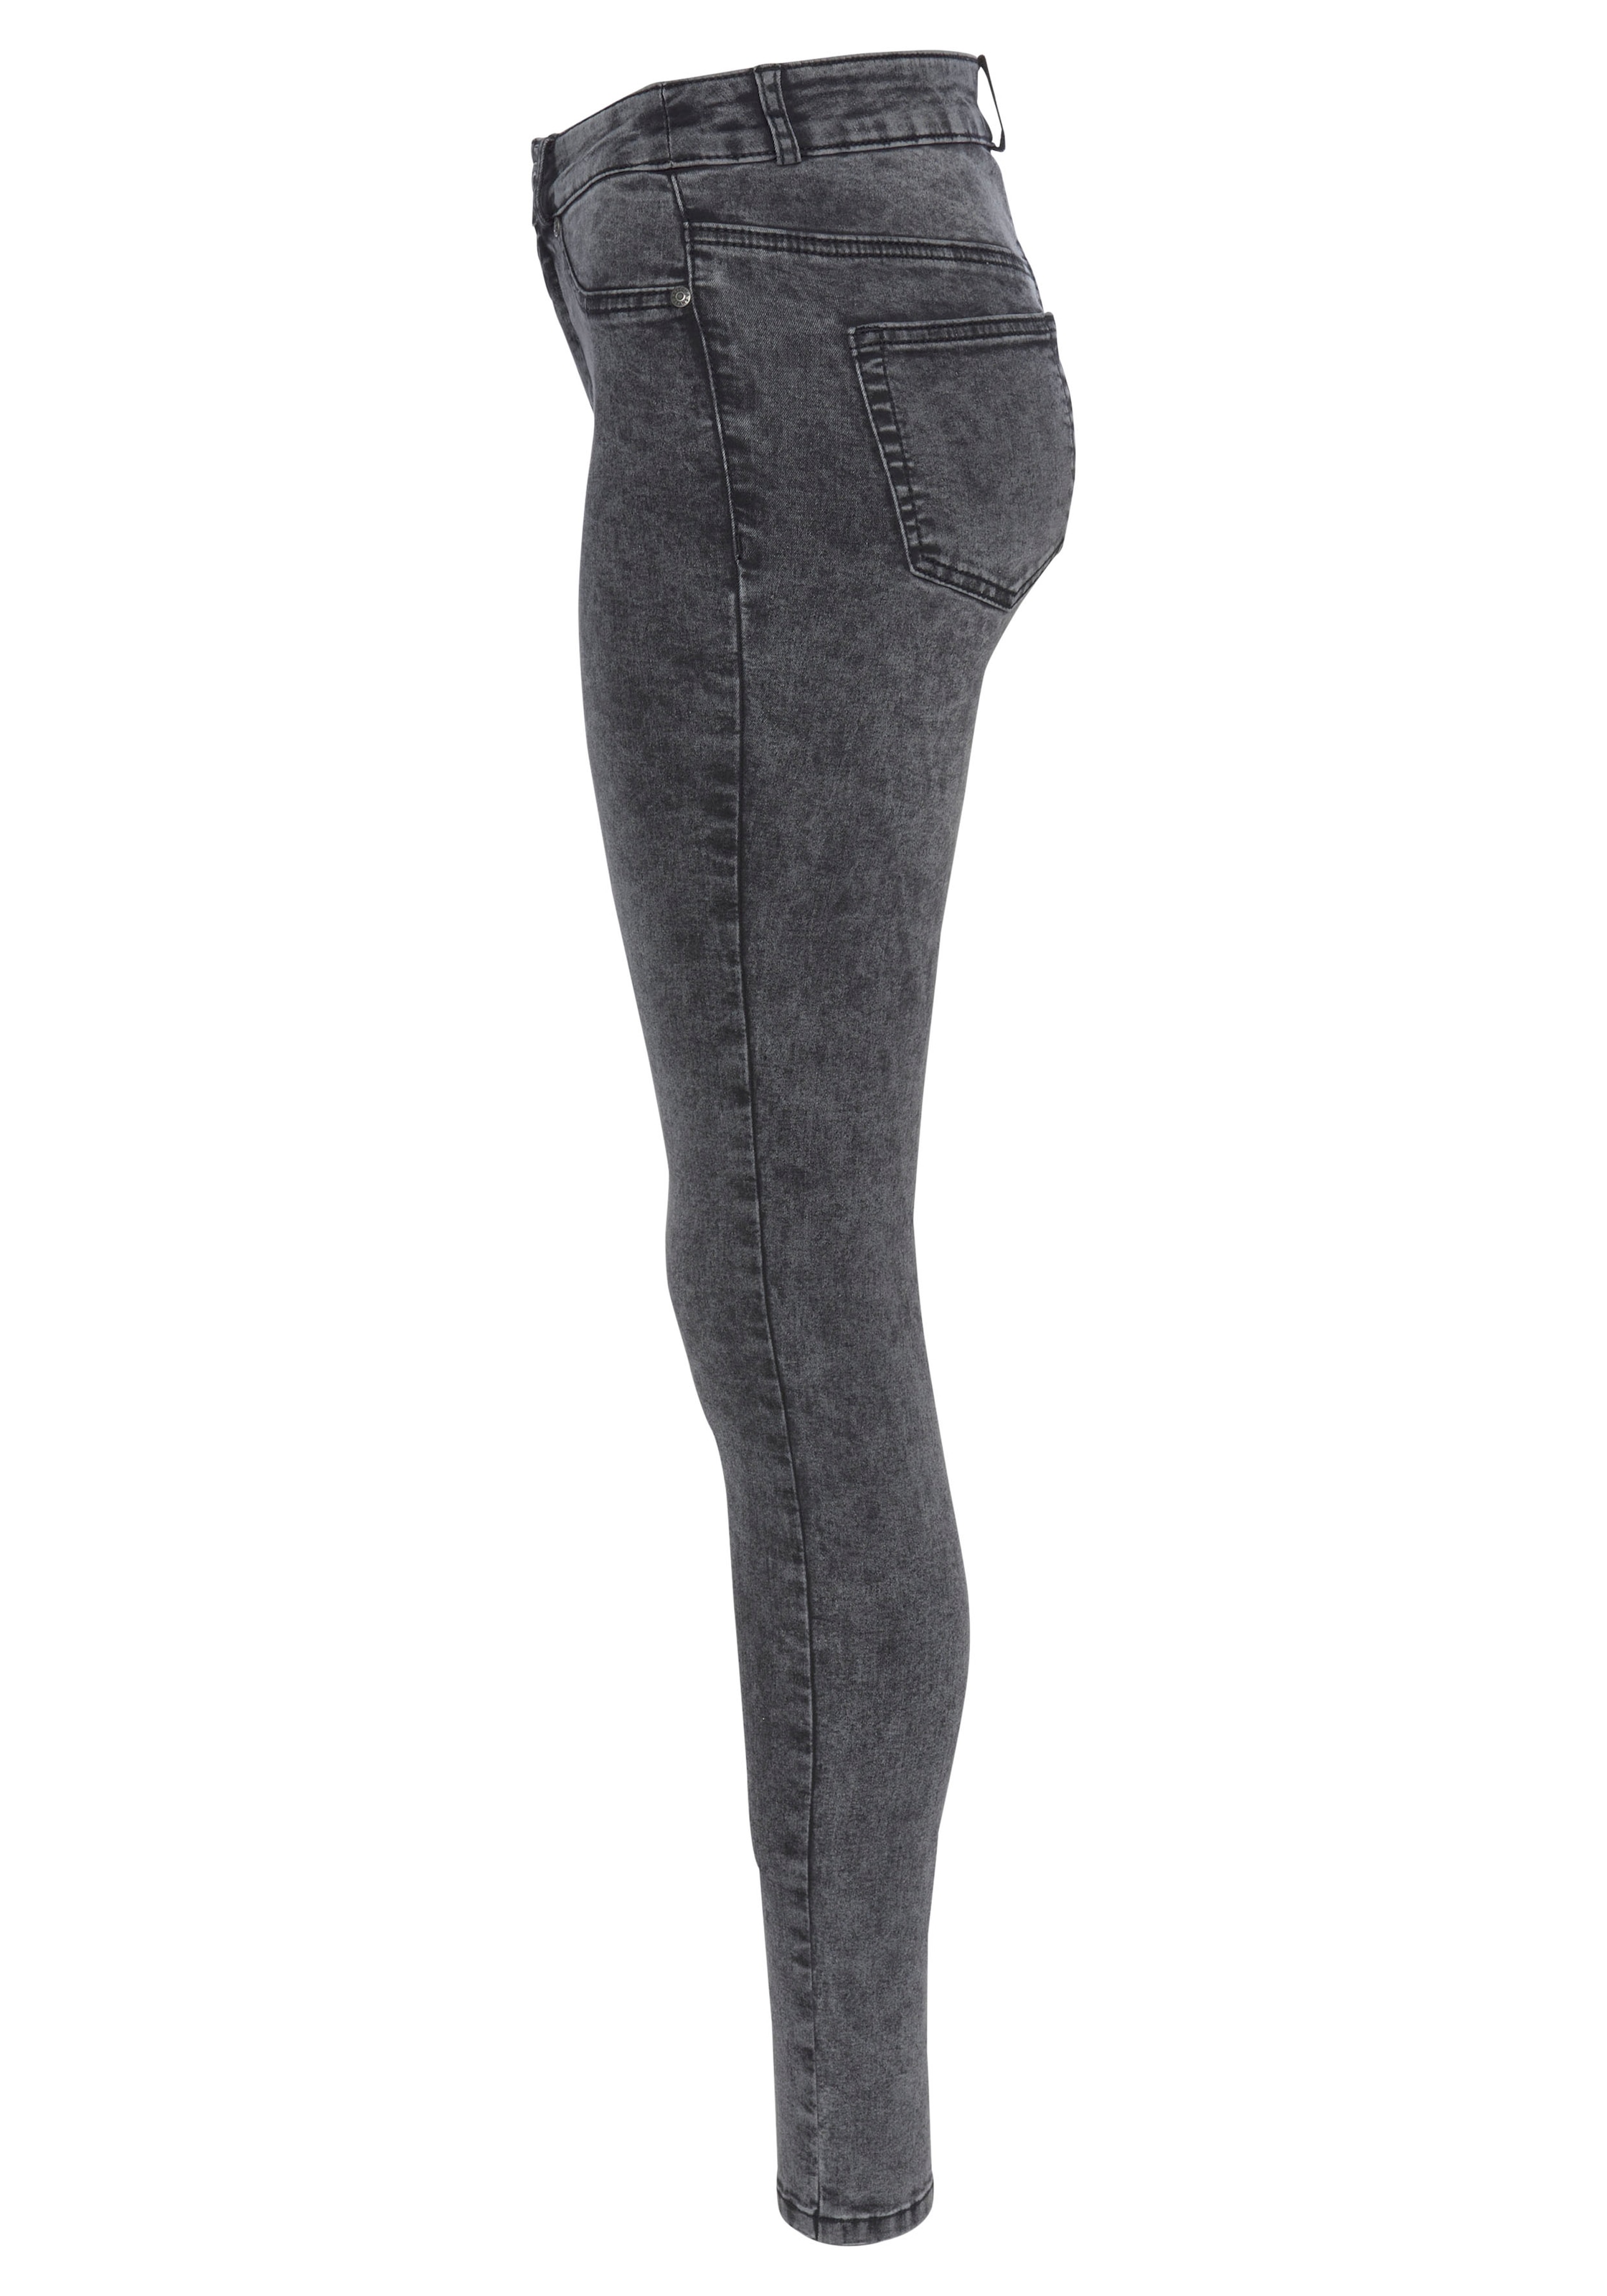 Moonwashed Jeans »Ultra im Shop Online washed«, Arizona Skinny-fit-Jeans Stretch OTTO moon